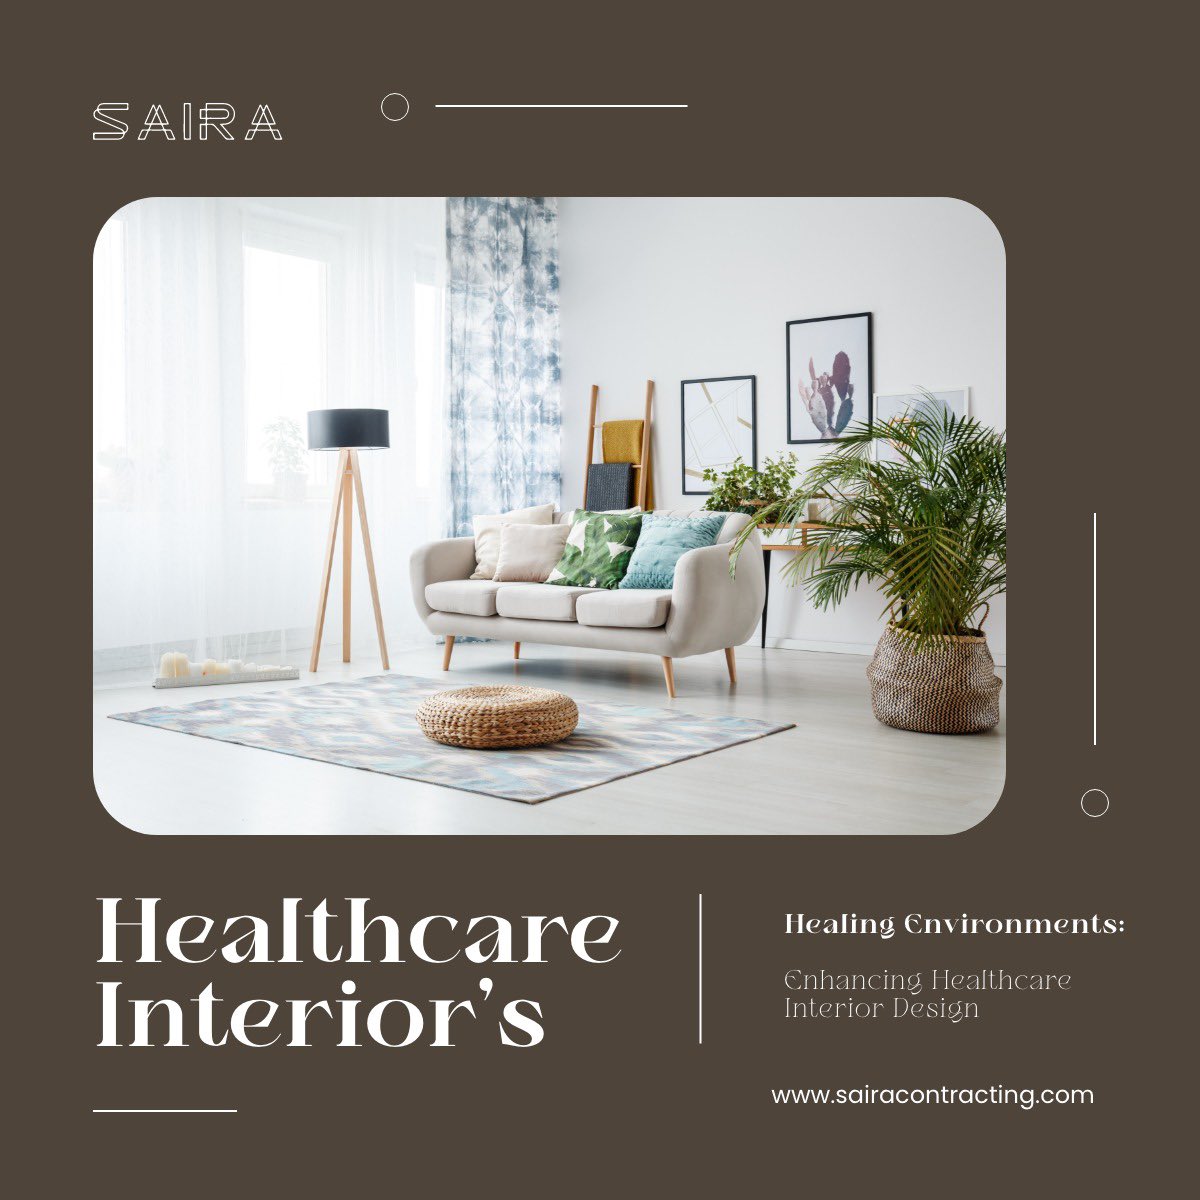 Discover the magic of Healing Environments in Healthcare Interior Design! Connect us on this captivating journey as we explore how design enhances patient well-being and healing. Don't miss out! #HealingEnvironments #HealthcareDesign #PatientWellBeing #DesignForHealing